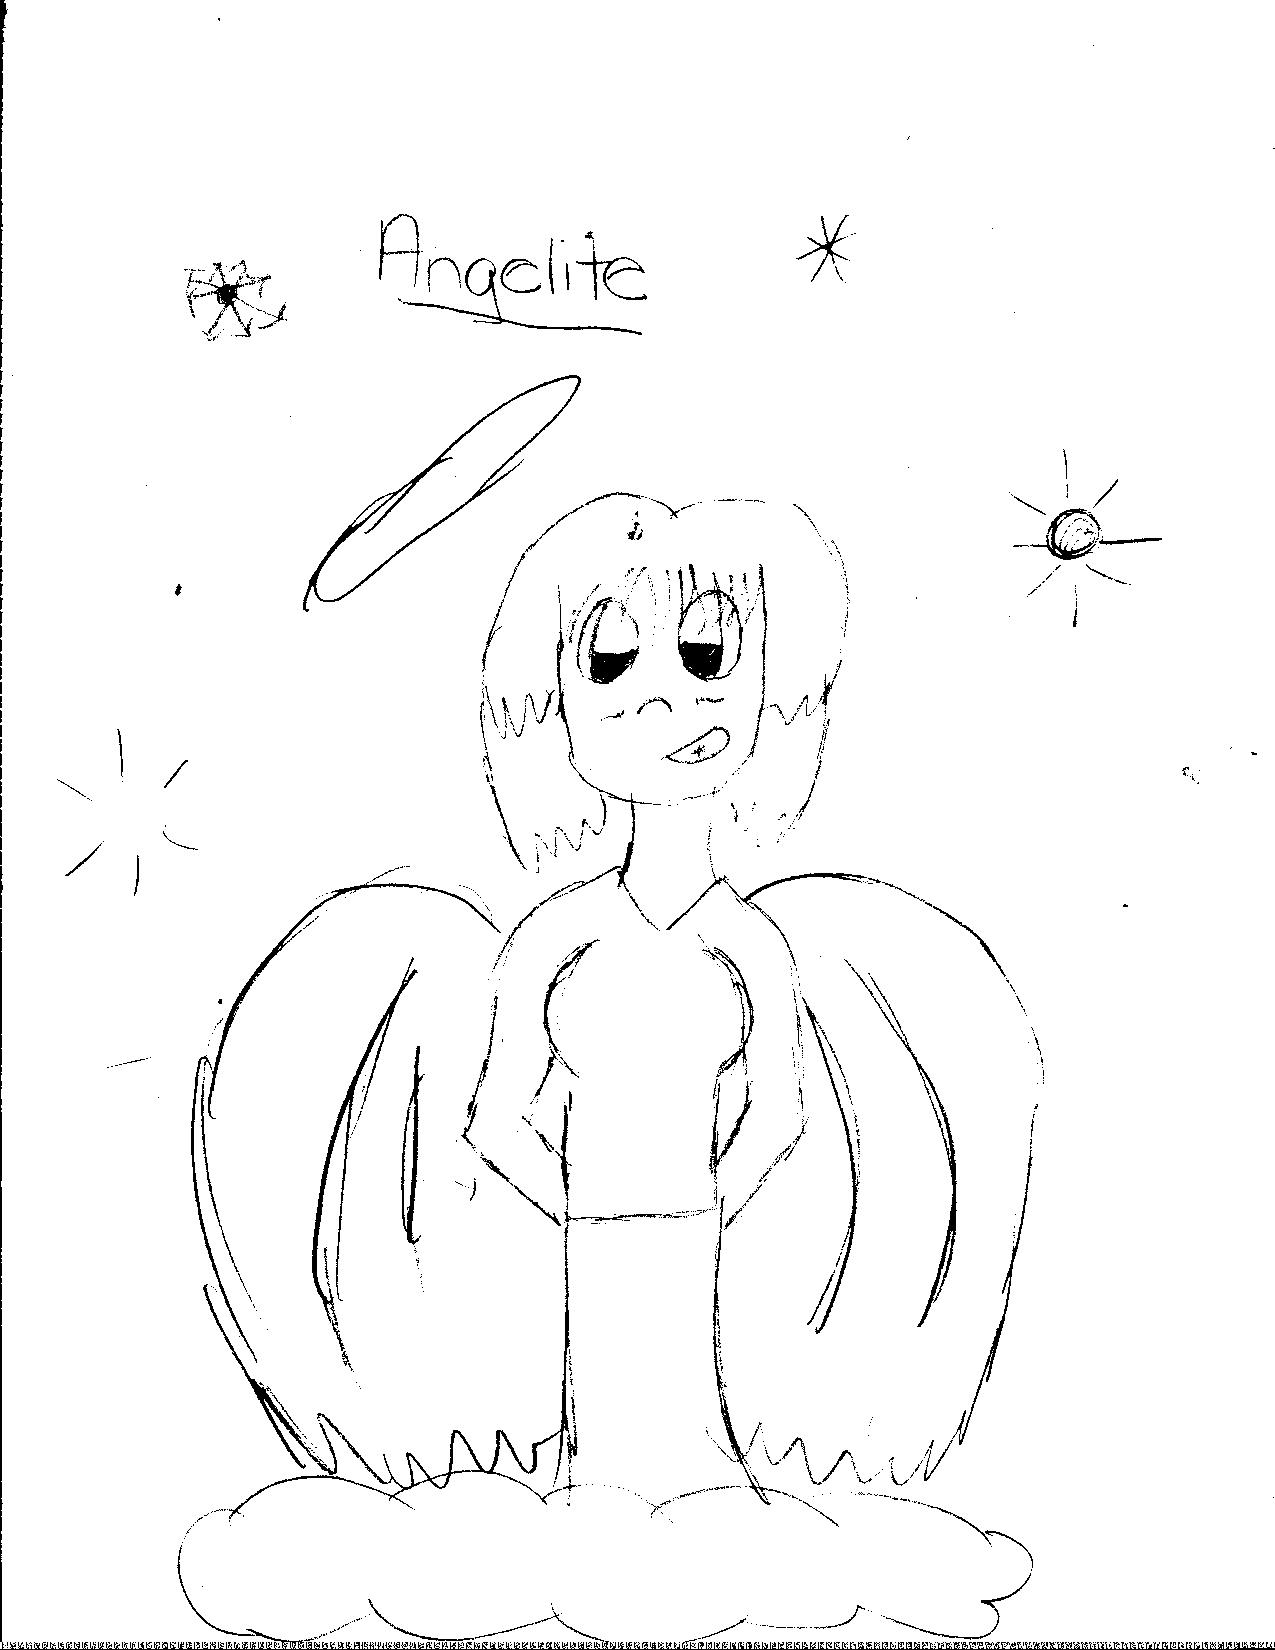 Angelite by Mandy_Max